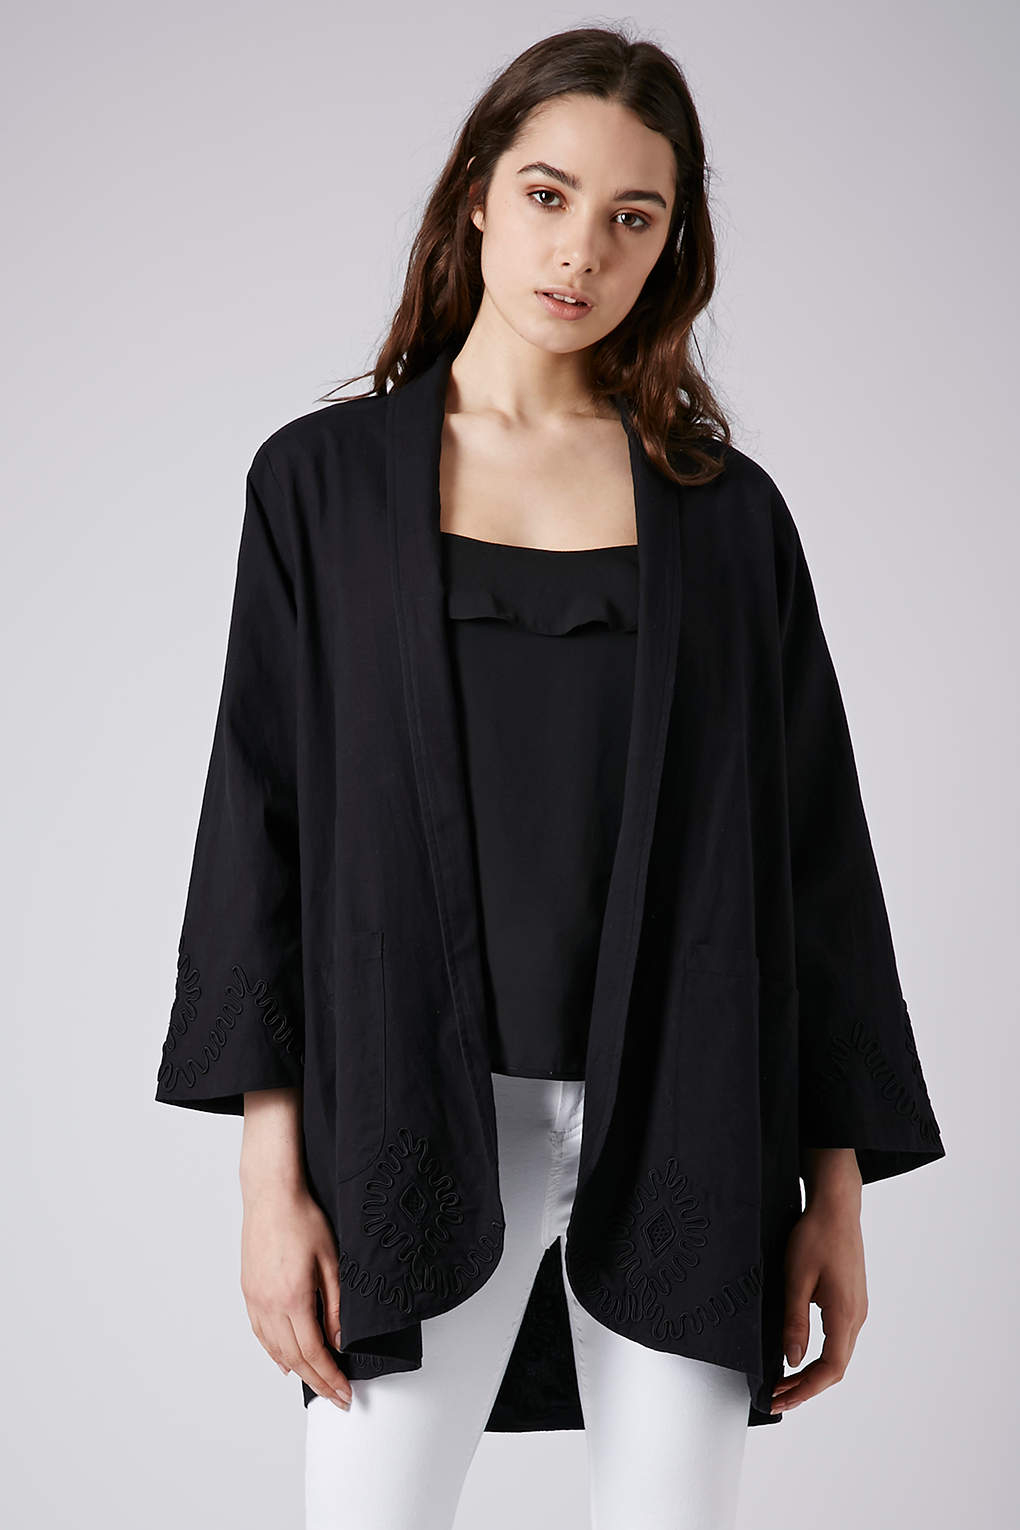 Topshop Embroidered Duster Jacket in Black | Lyst